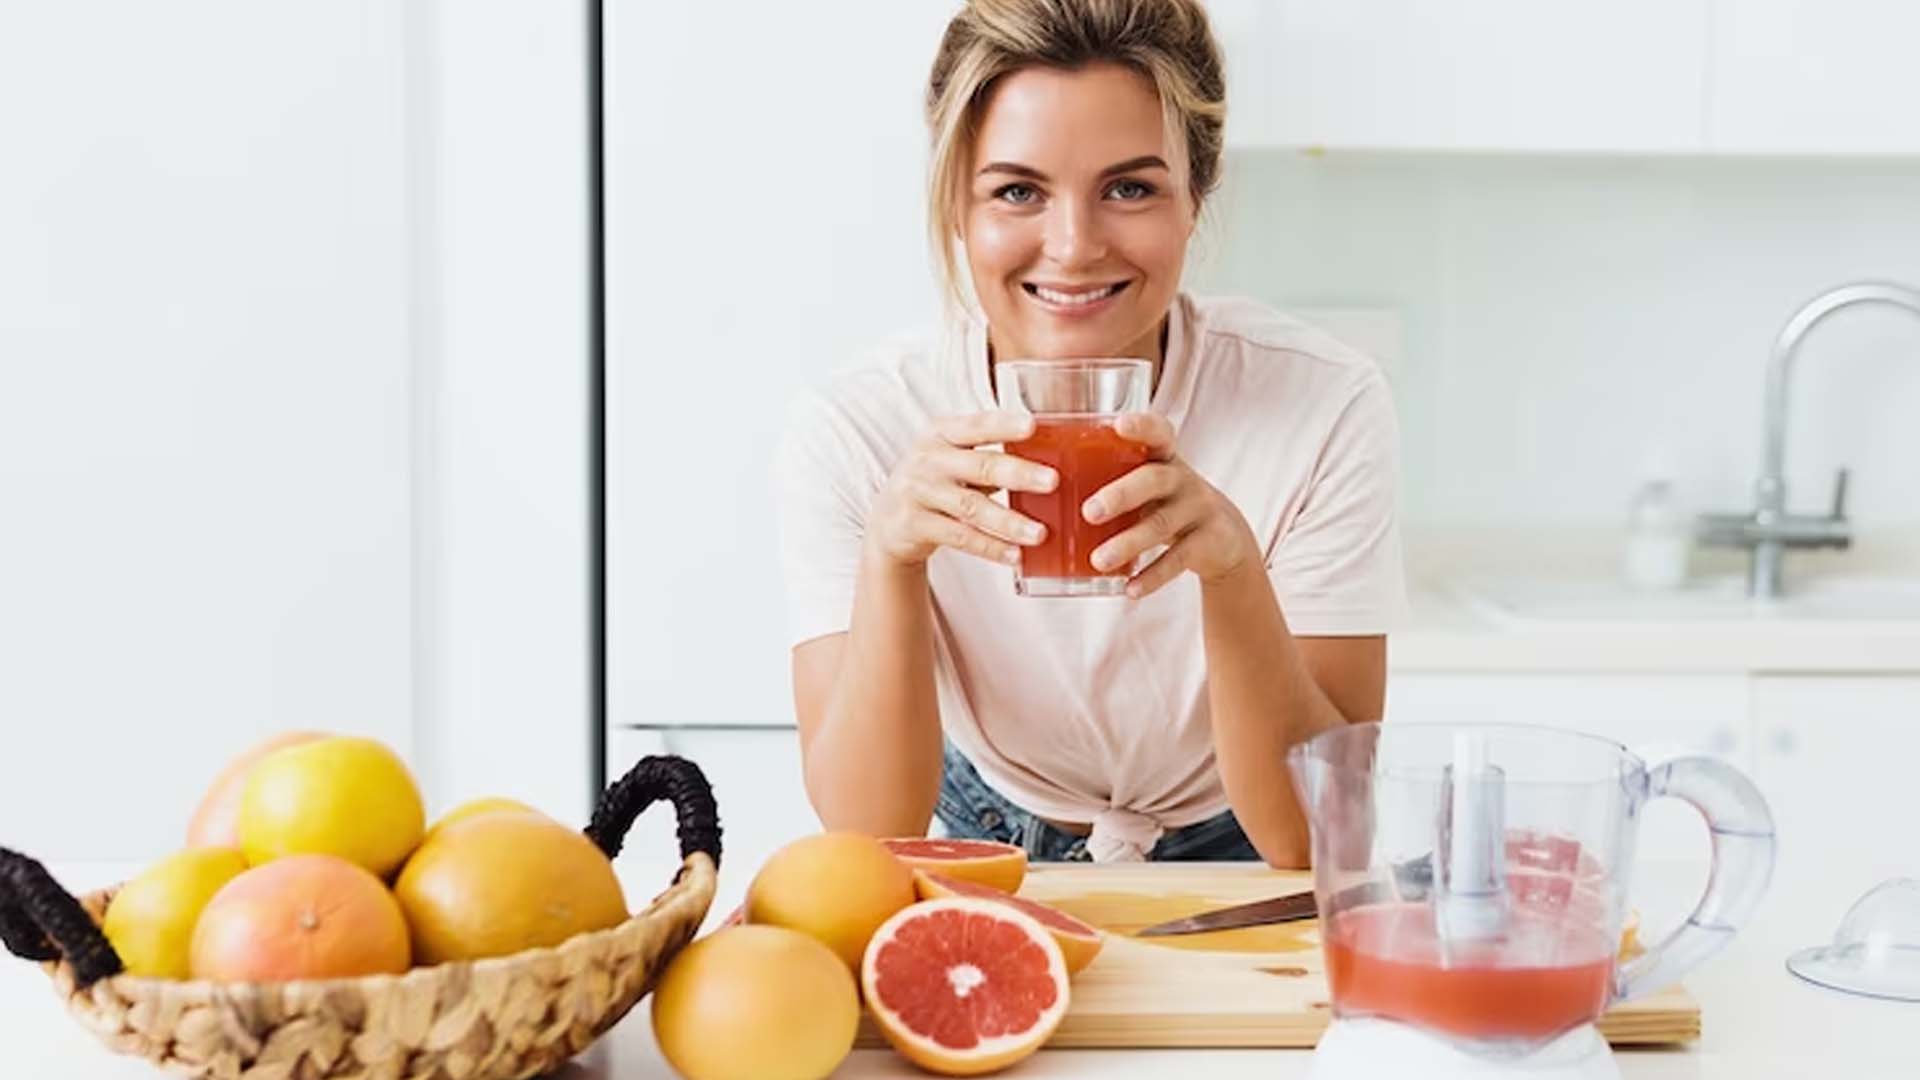 Can You Take Fruit Juice on Diet?